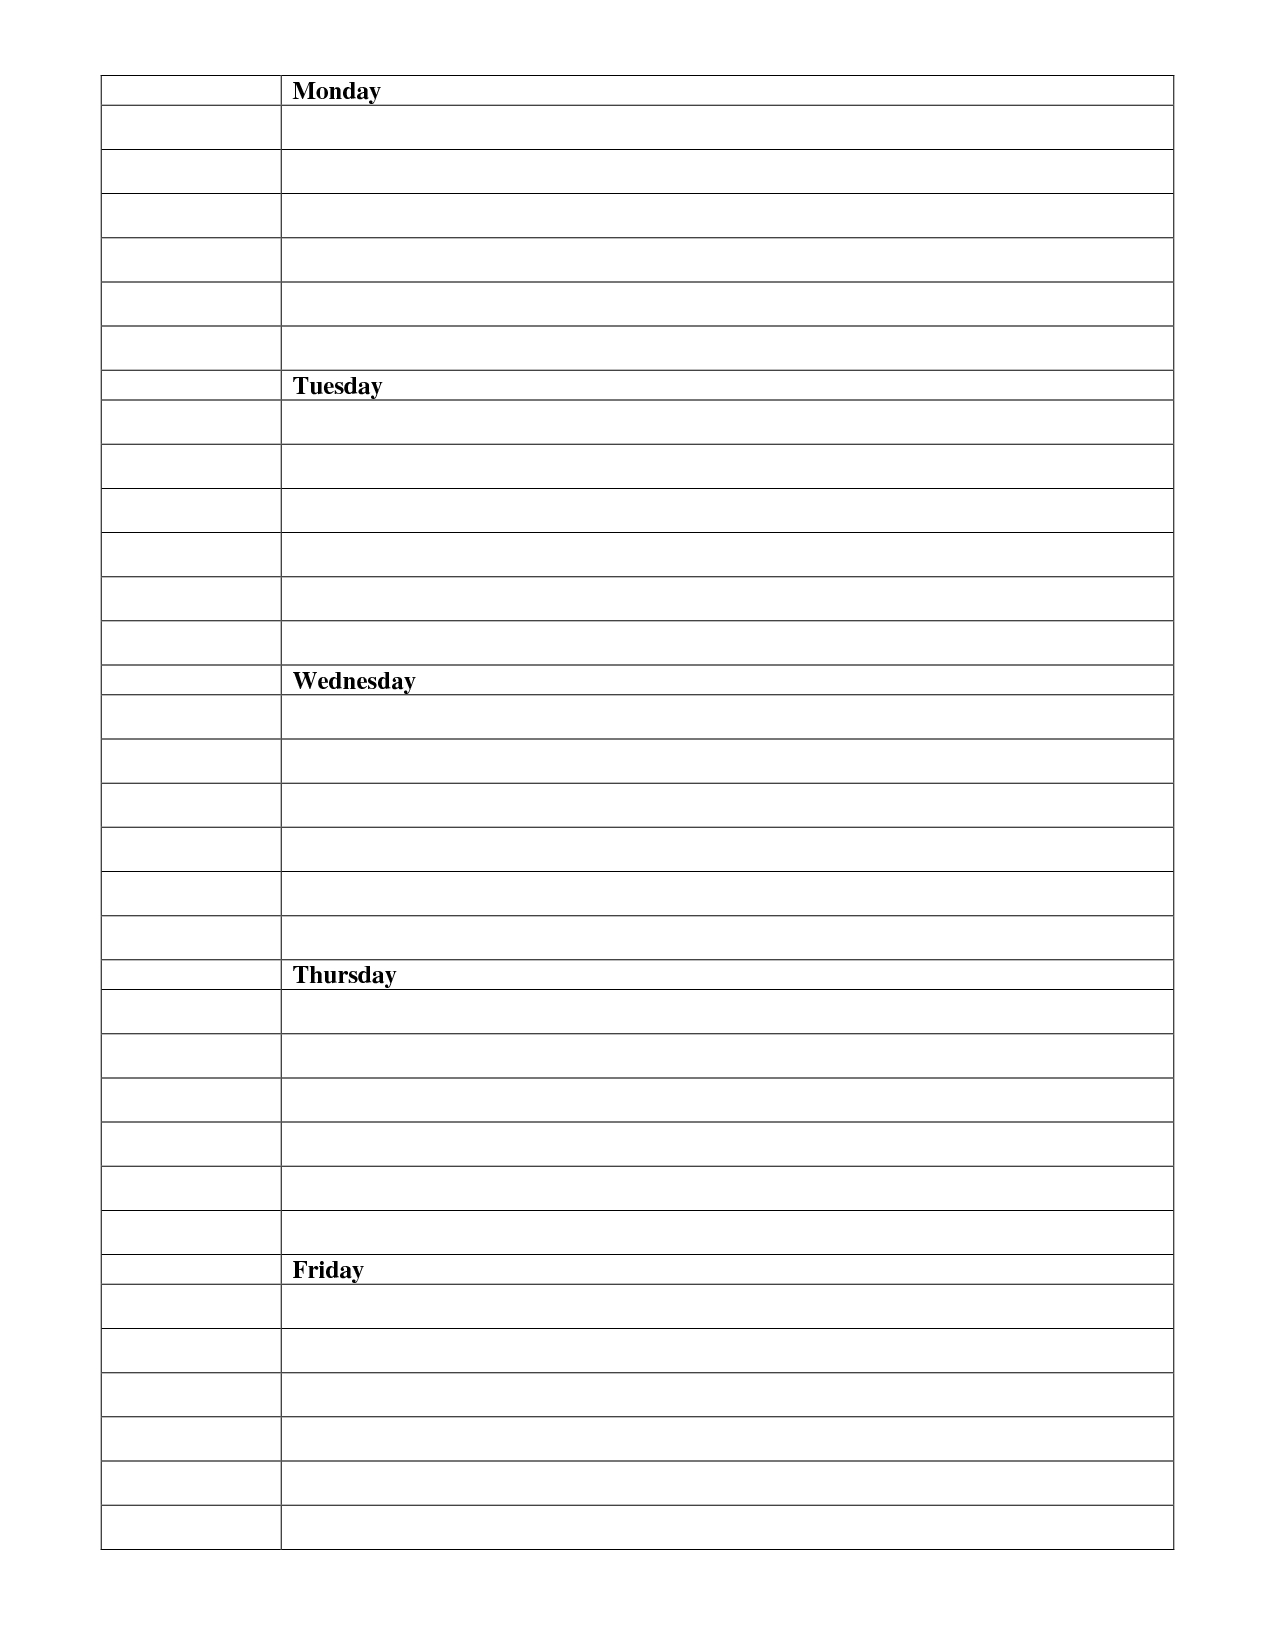 30 Images Of Weekly Homework Assignment Sheet Template | Bfegy - Free Printable Homework Assignment Sheets